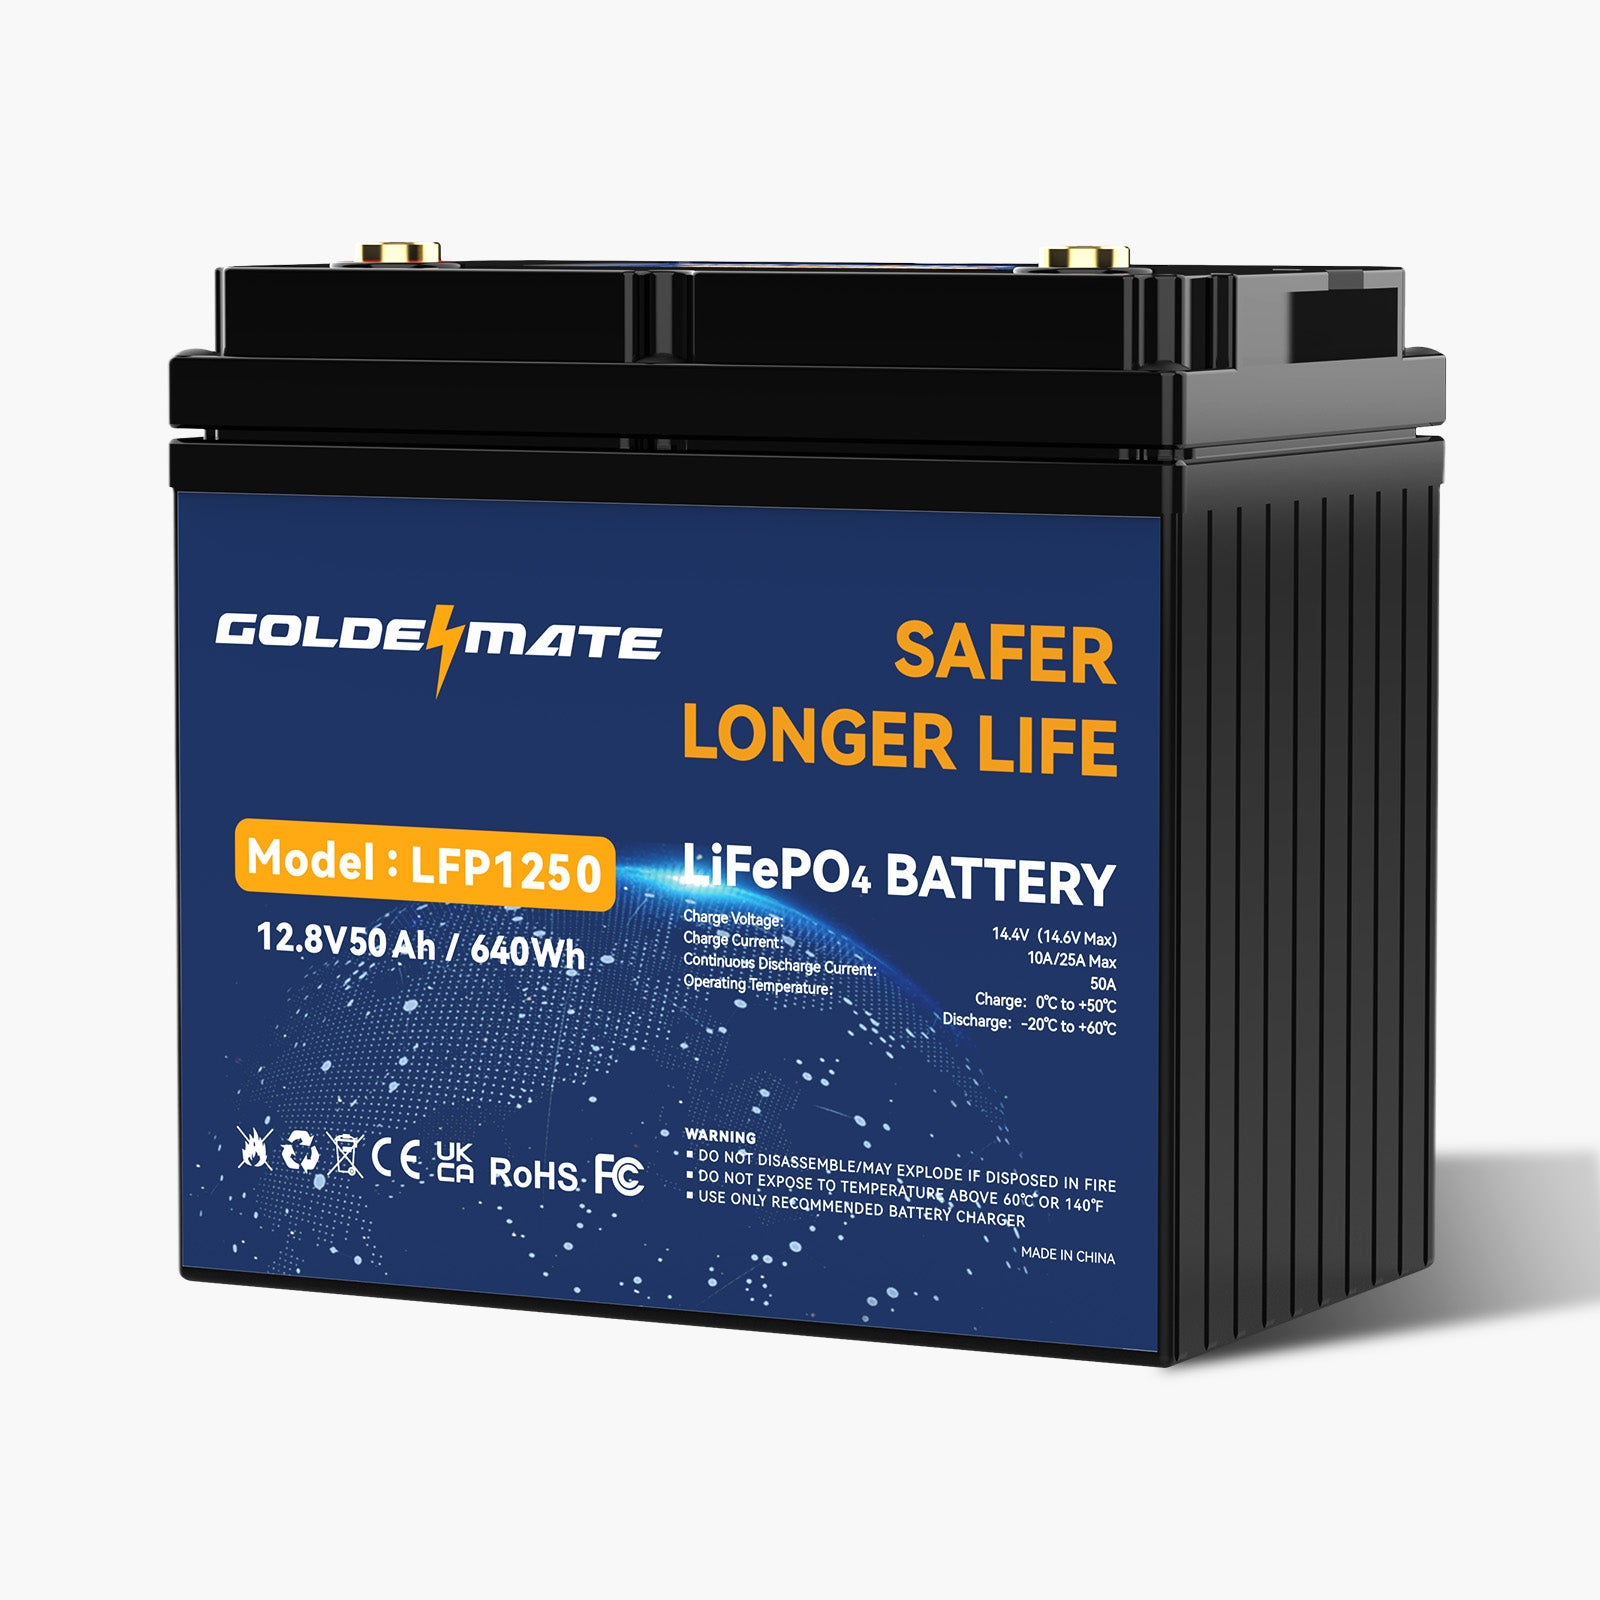 12V 50Ah LiFePO4 Lithium Battery- 640Wh Energy, Marine, RV, Fish Finder Battery 1 Pack 12V 50Ah / 5 Years Warranty(Free)